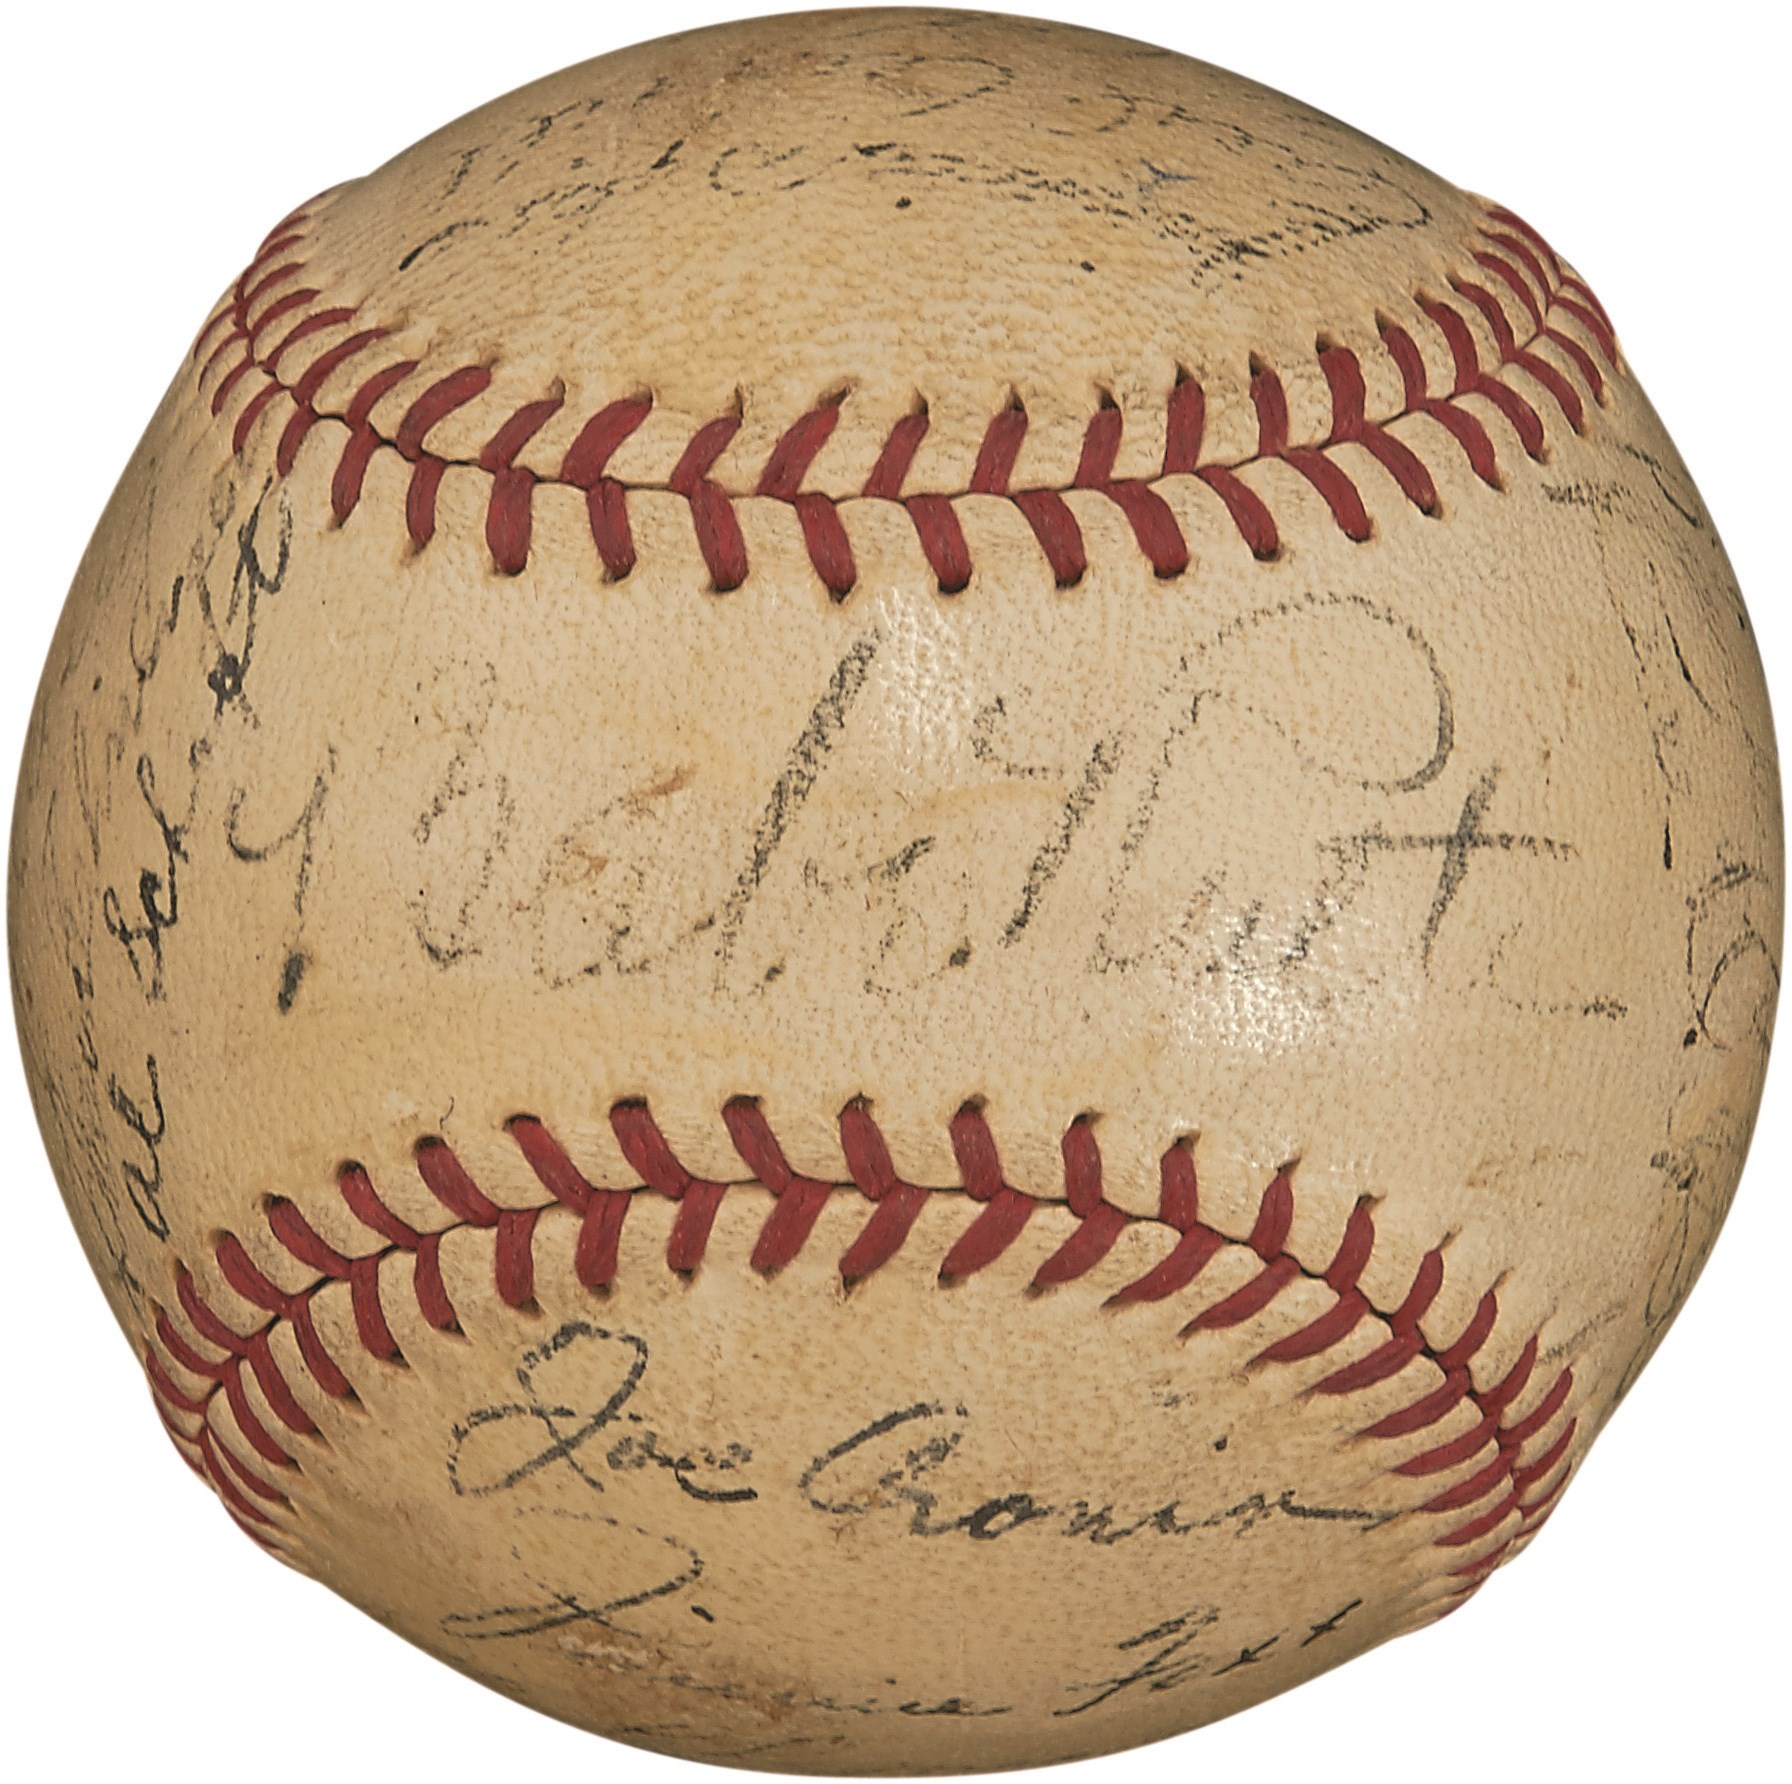 Baseball Autographs - 1934 American League All-Star Team-Signed Baseball with Ruth and Gehrig (PSA)